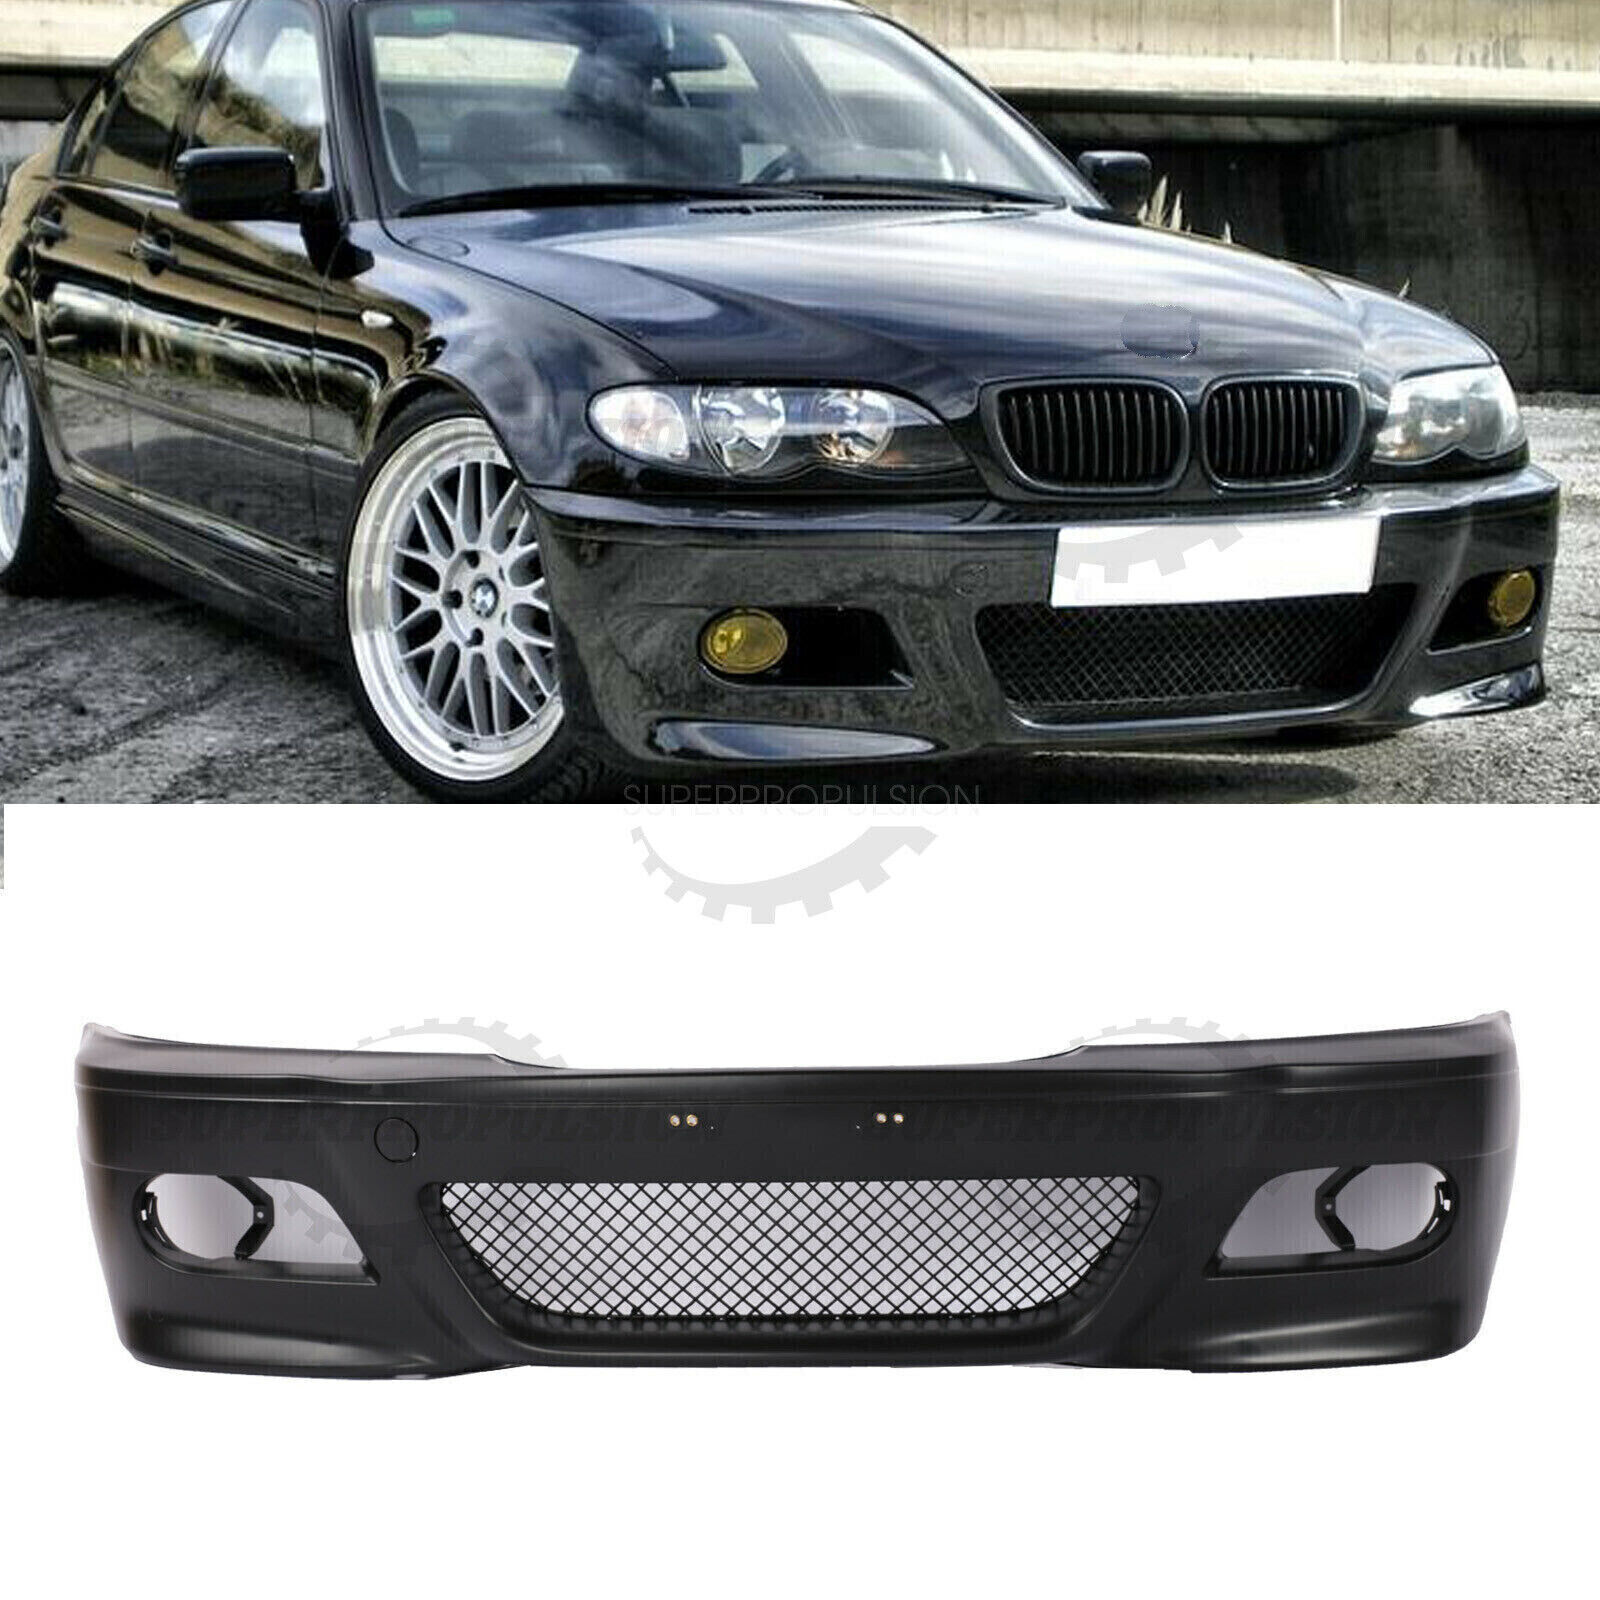 For BMW E46 M3 Style Front Bumper Covers 4dr 2dr 1999-05 SEDAN Wagon